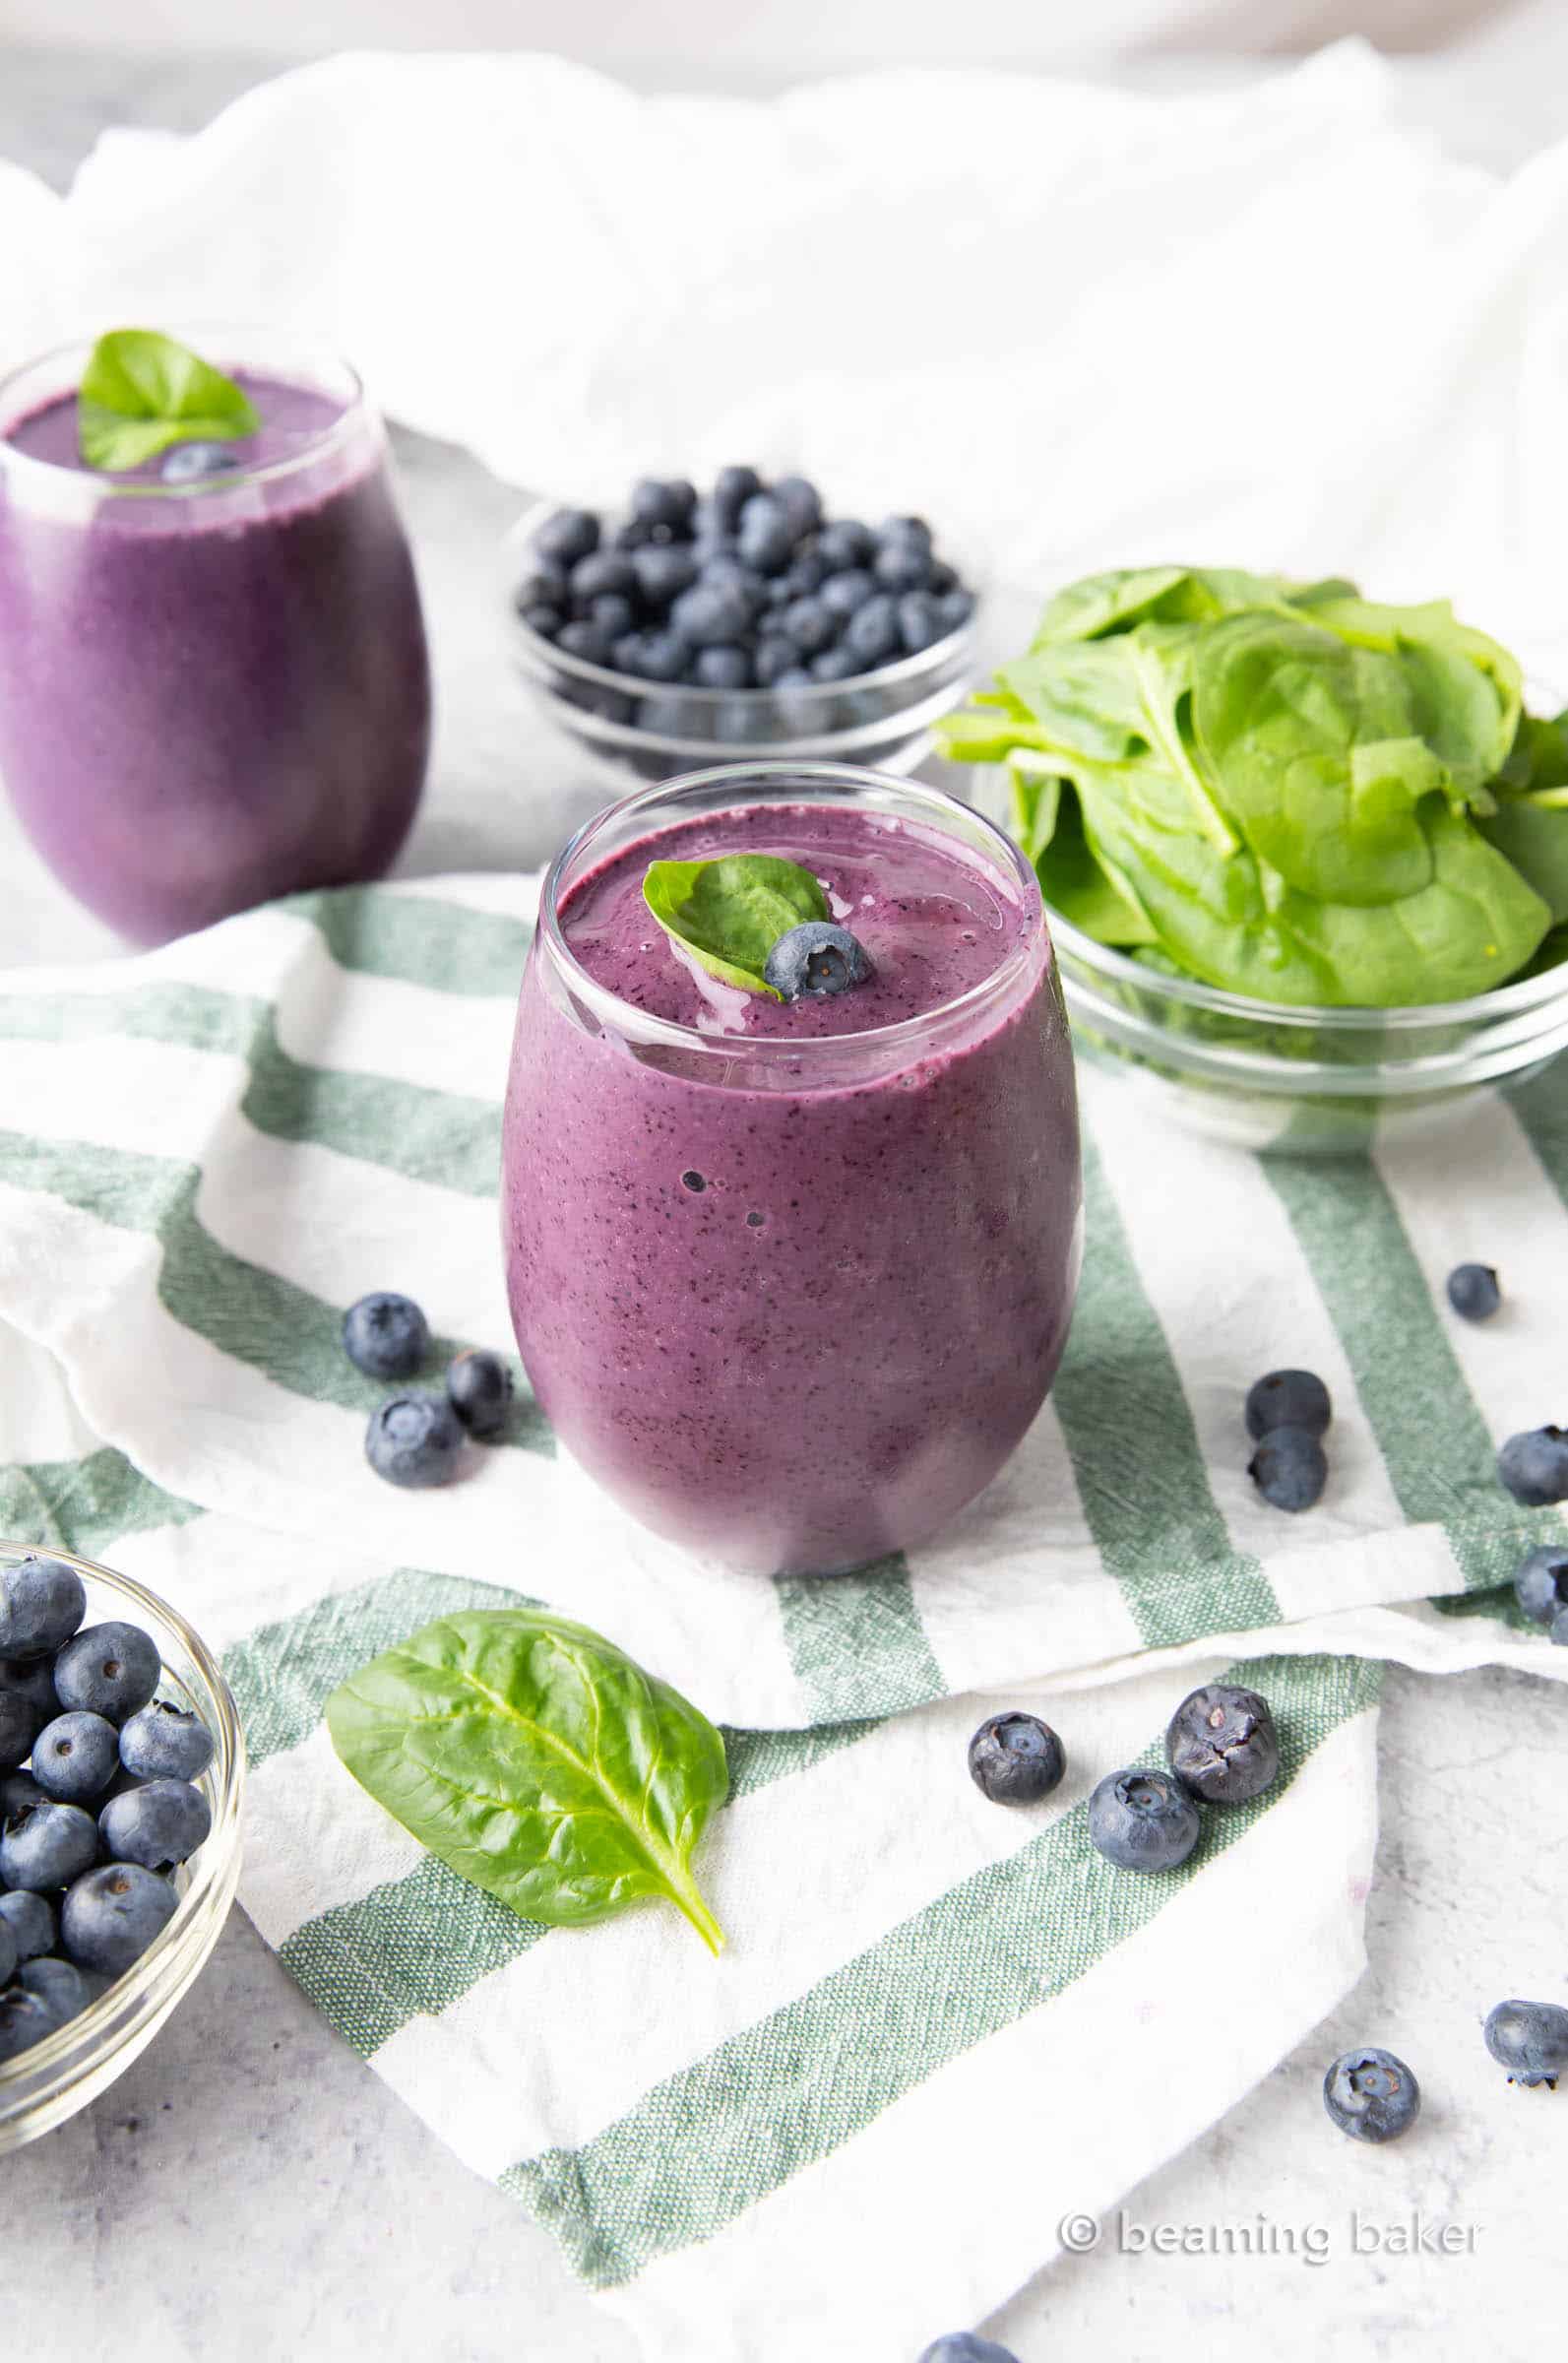 Blueberry Spinach Smoothie: an easy 4 ingredient recipe for a refreshing, healthy blueberry spinach smoothie packed with antioxidants. Ready in minutes. #Blueberry #Spinach #Smoothie #Healthy | Recipe at BeamingBaker.com